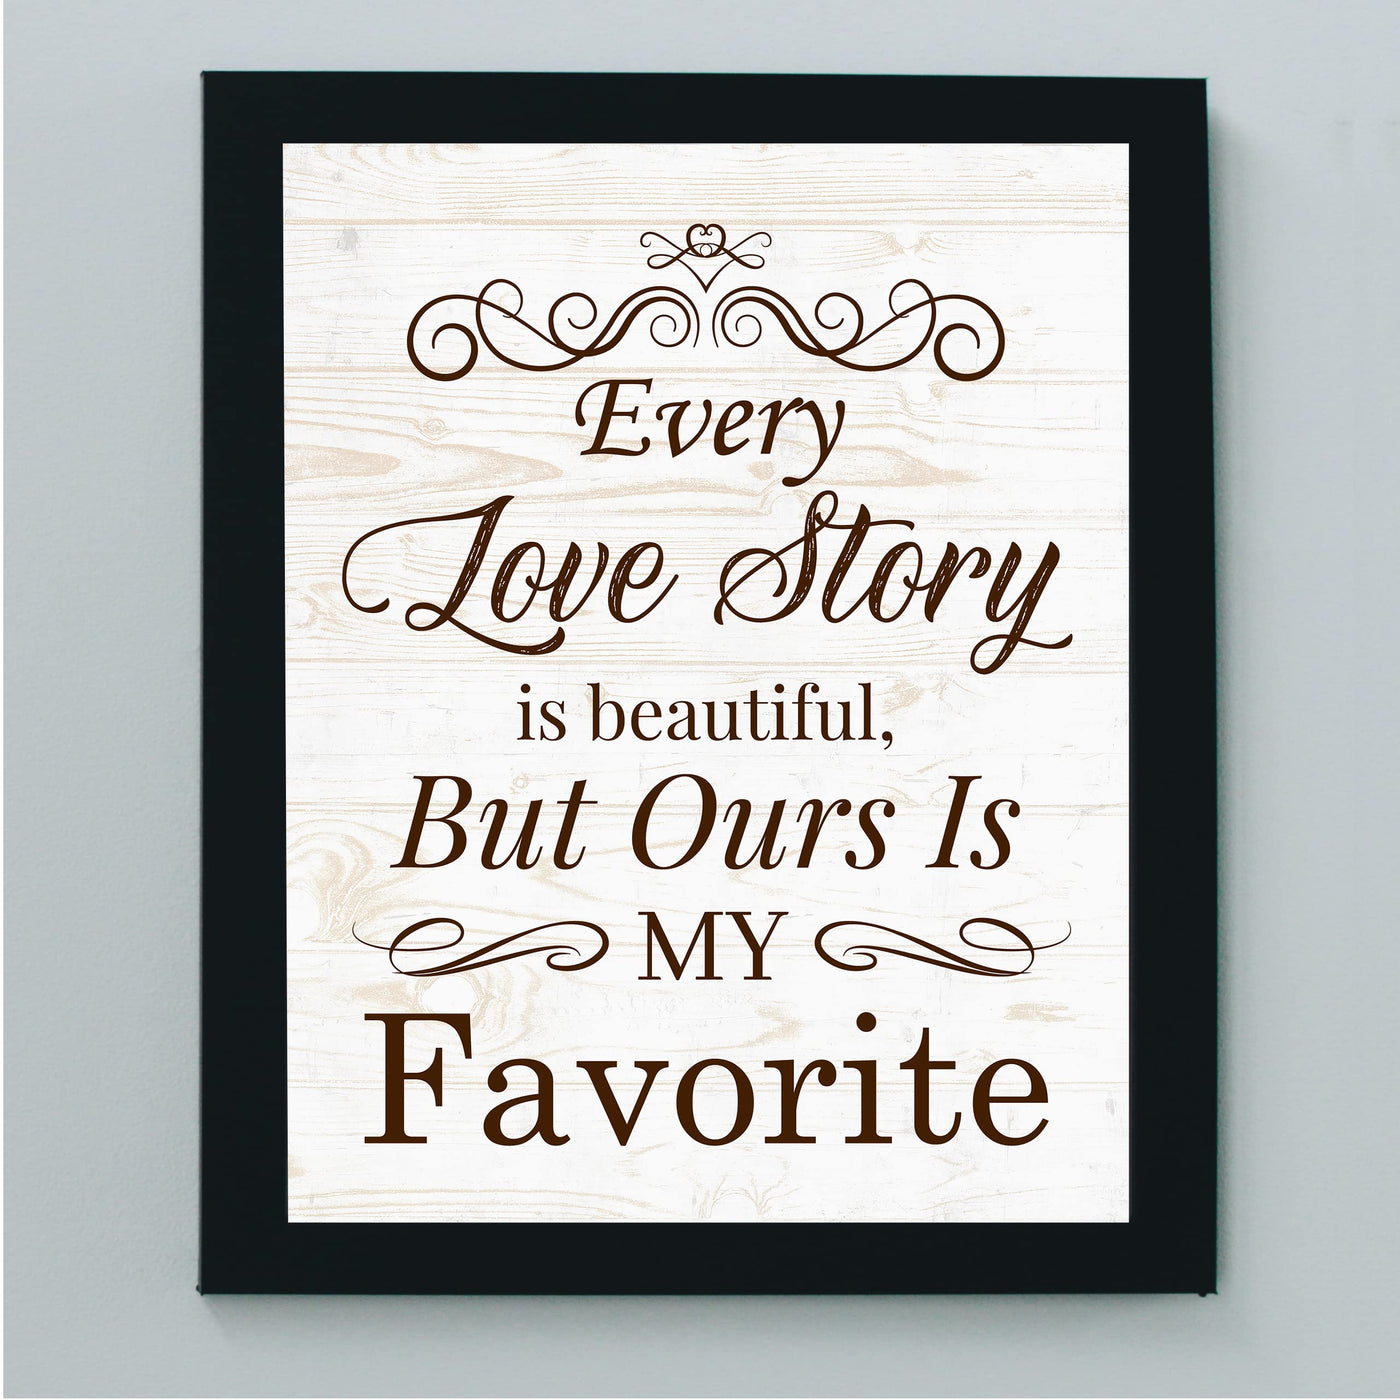 Our Story Is My Favorite Love Quotes Wall Decor -8 x 10" Inspirational Love & Marriage Print w/Wood Design-Ready to Frame. Romantic Gift for Couples. Perfect Wedding Sign! Printed on Photo Paper.